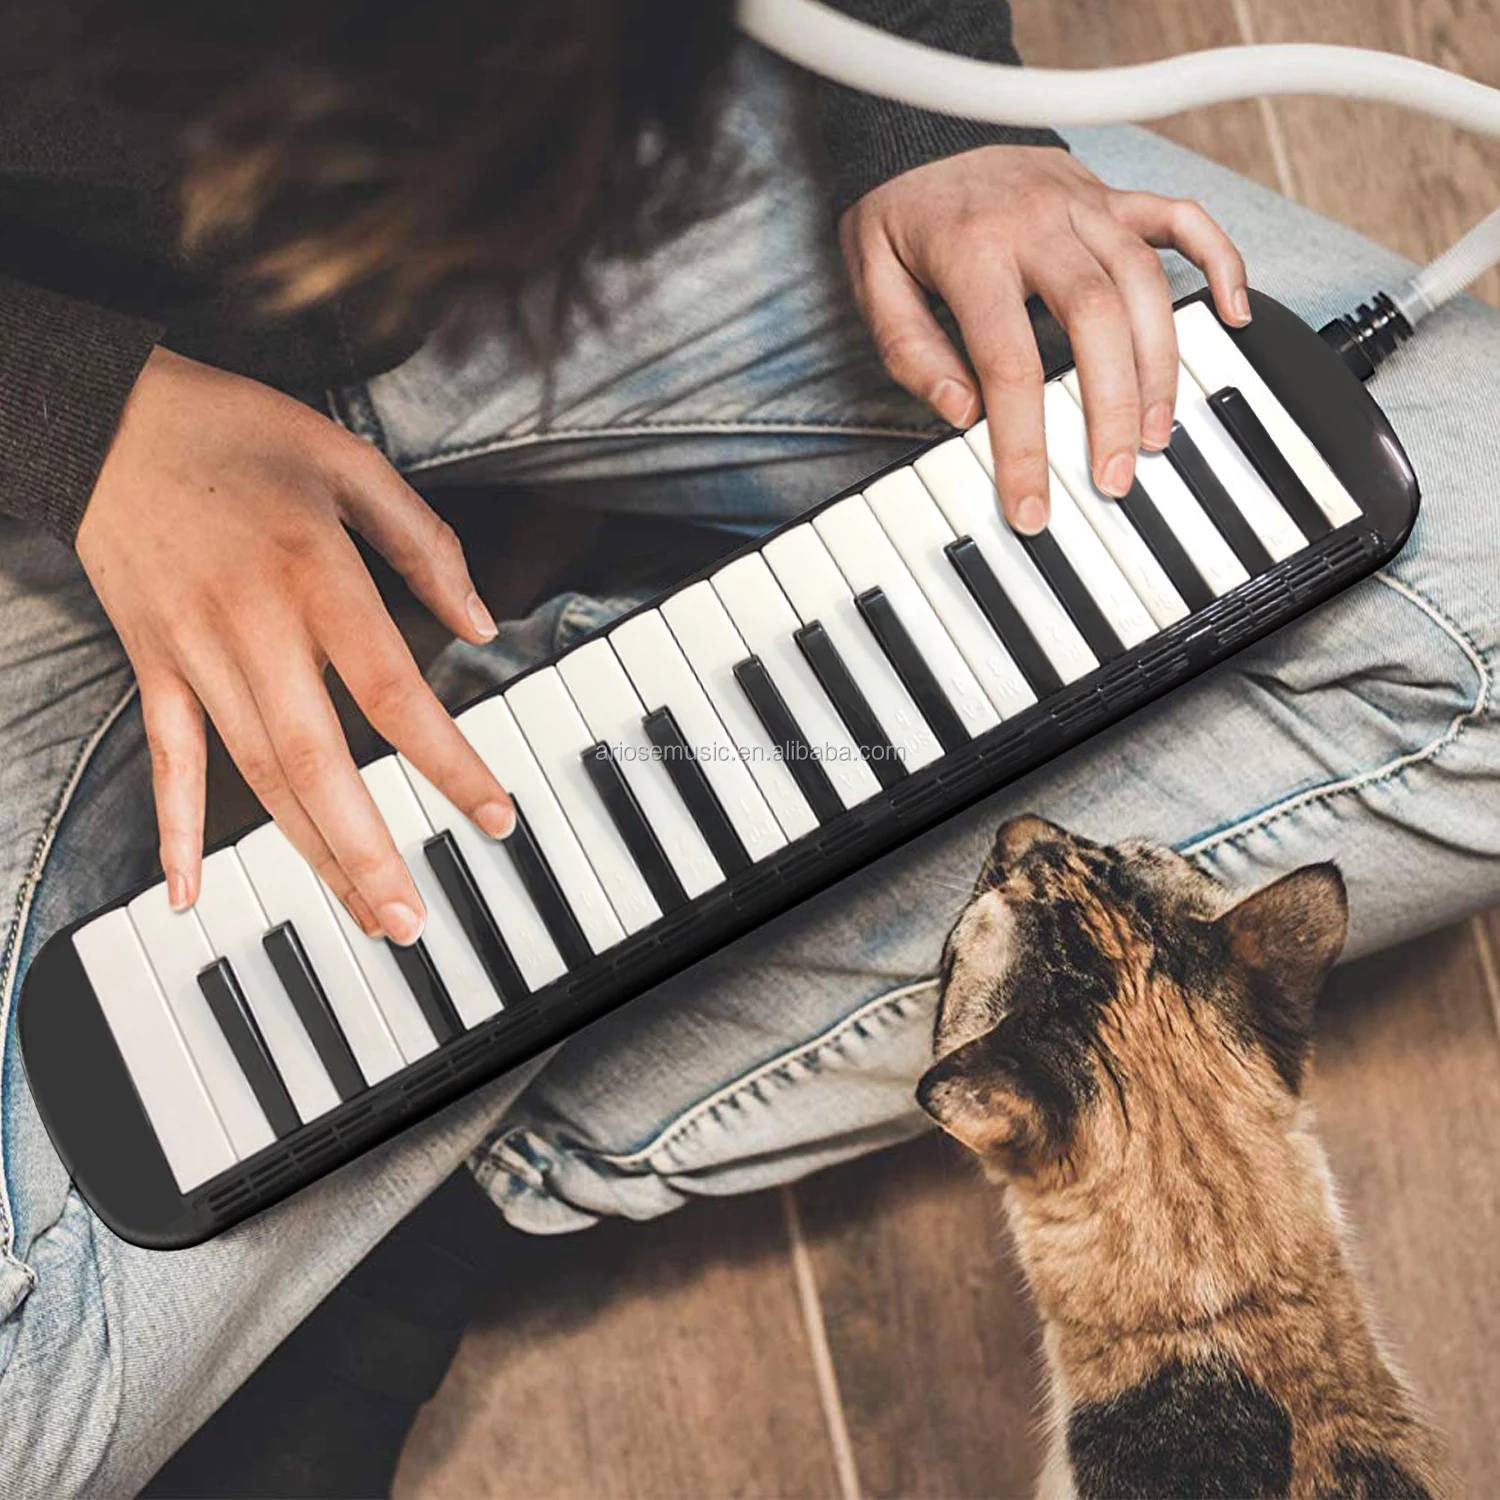 AUTOKOLA Music Lover 37-Key Melodica with Mouthpiece & Hose & Bag Black 3-7 Days Delivery 